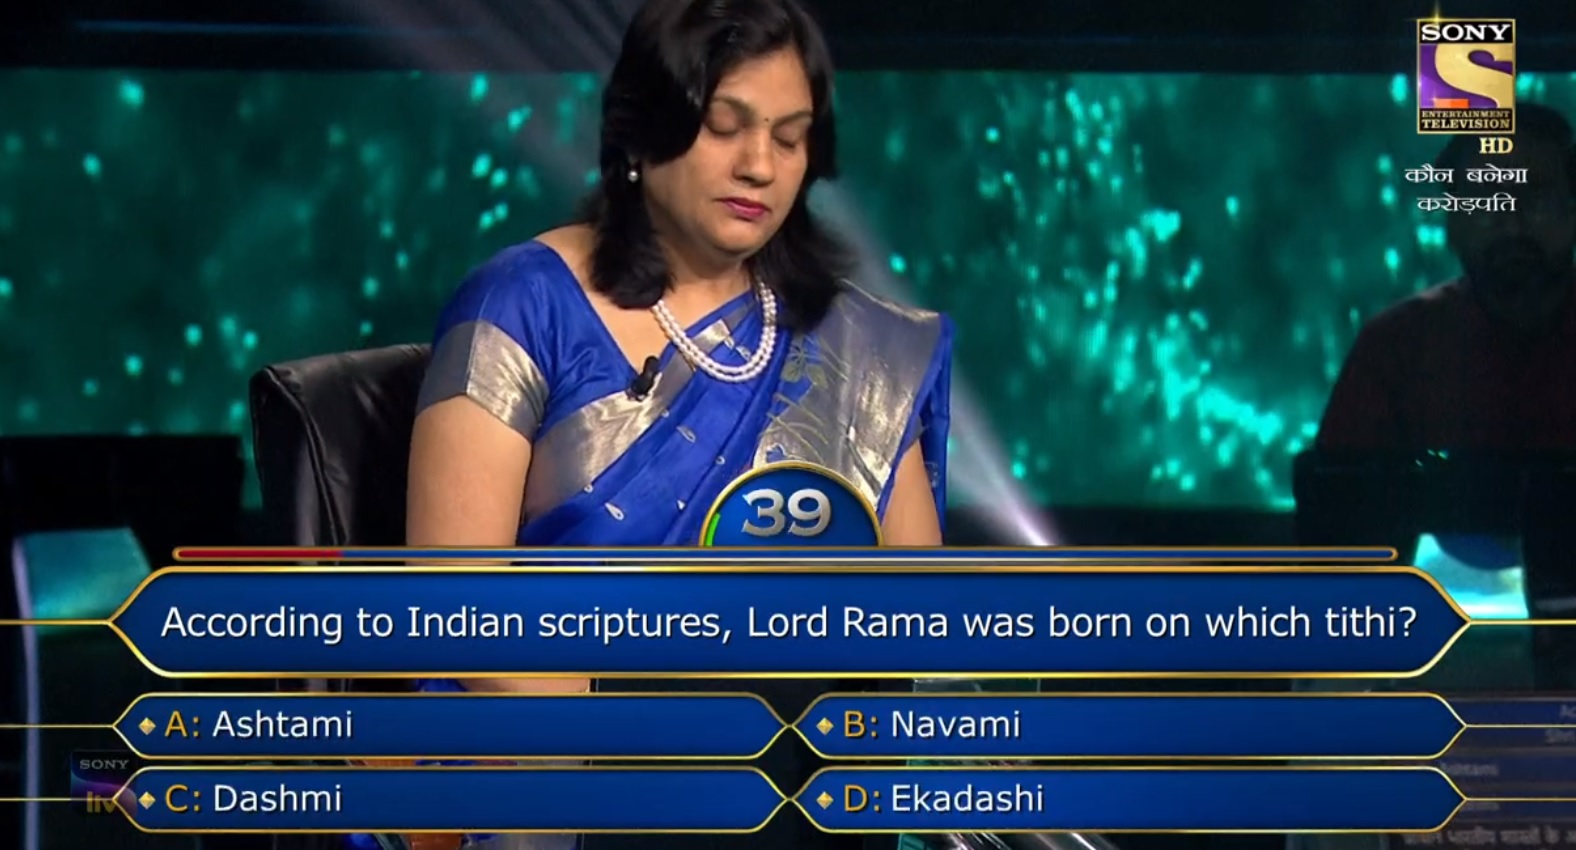 Ques : According to Indian scriptures, Lord Rama was born on which tithi?